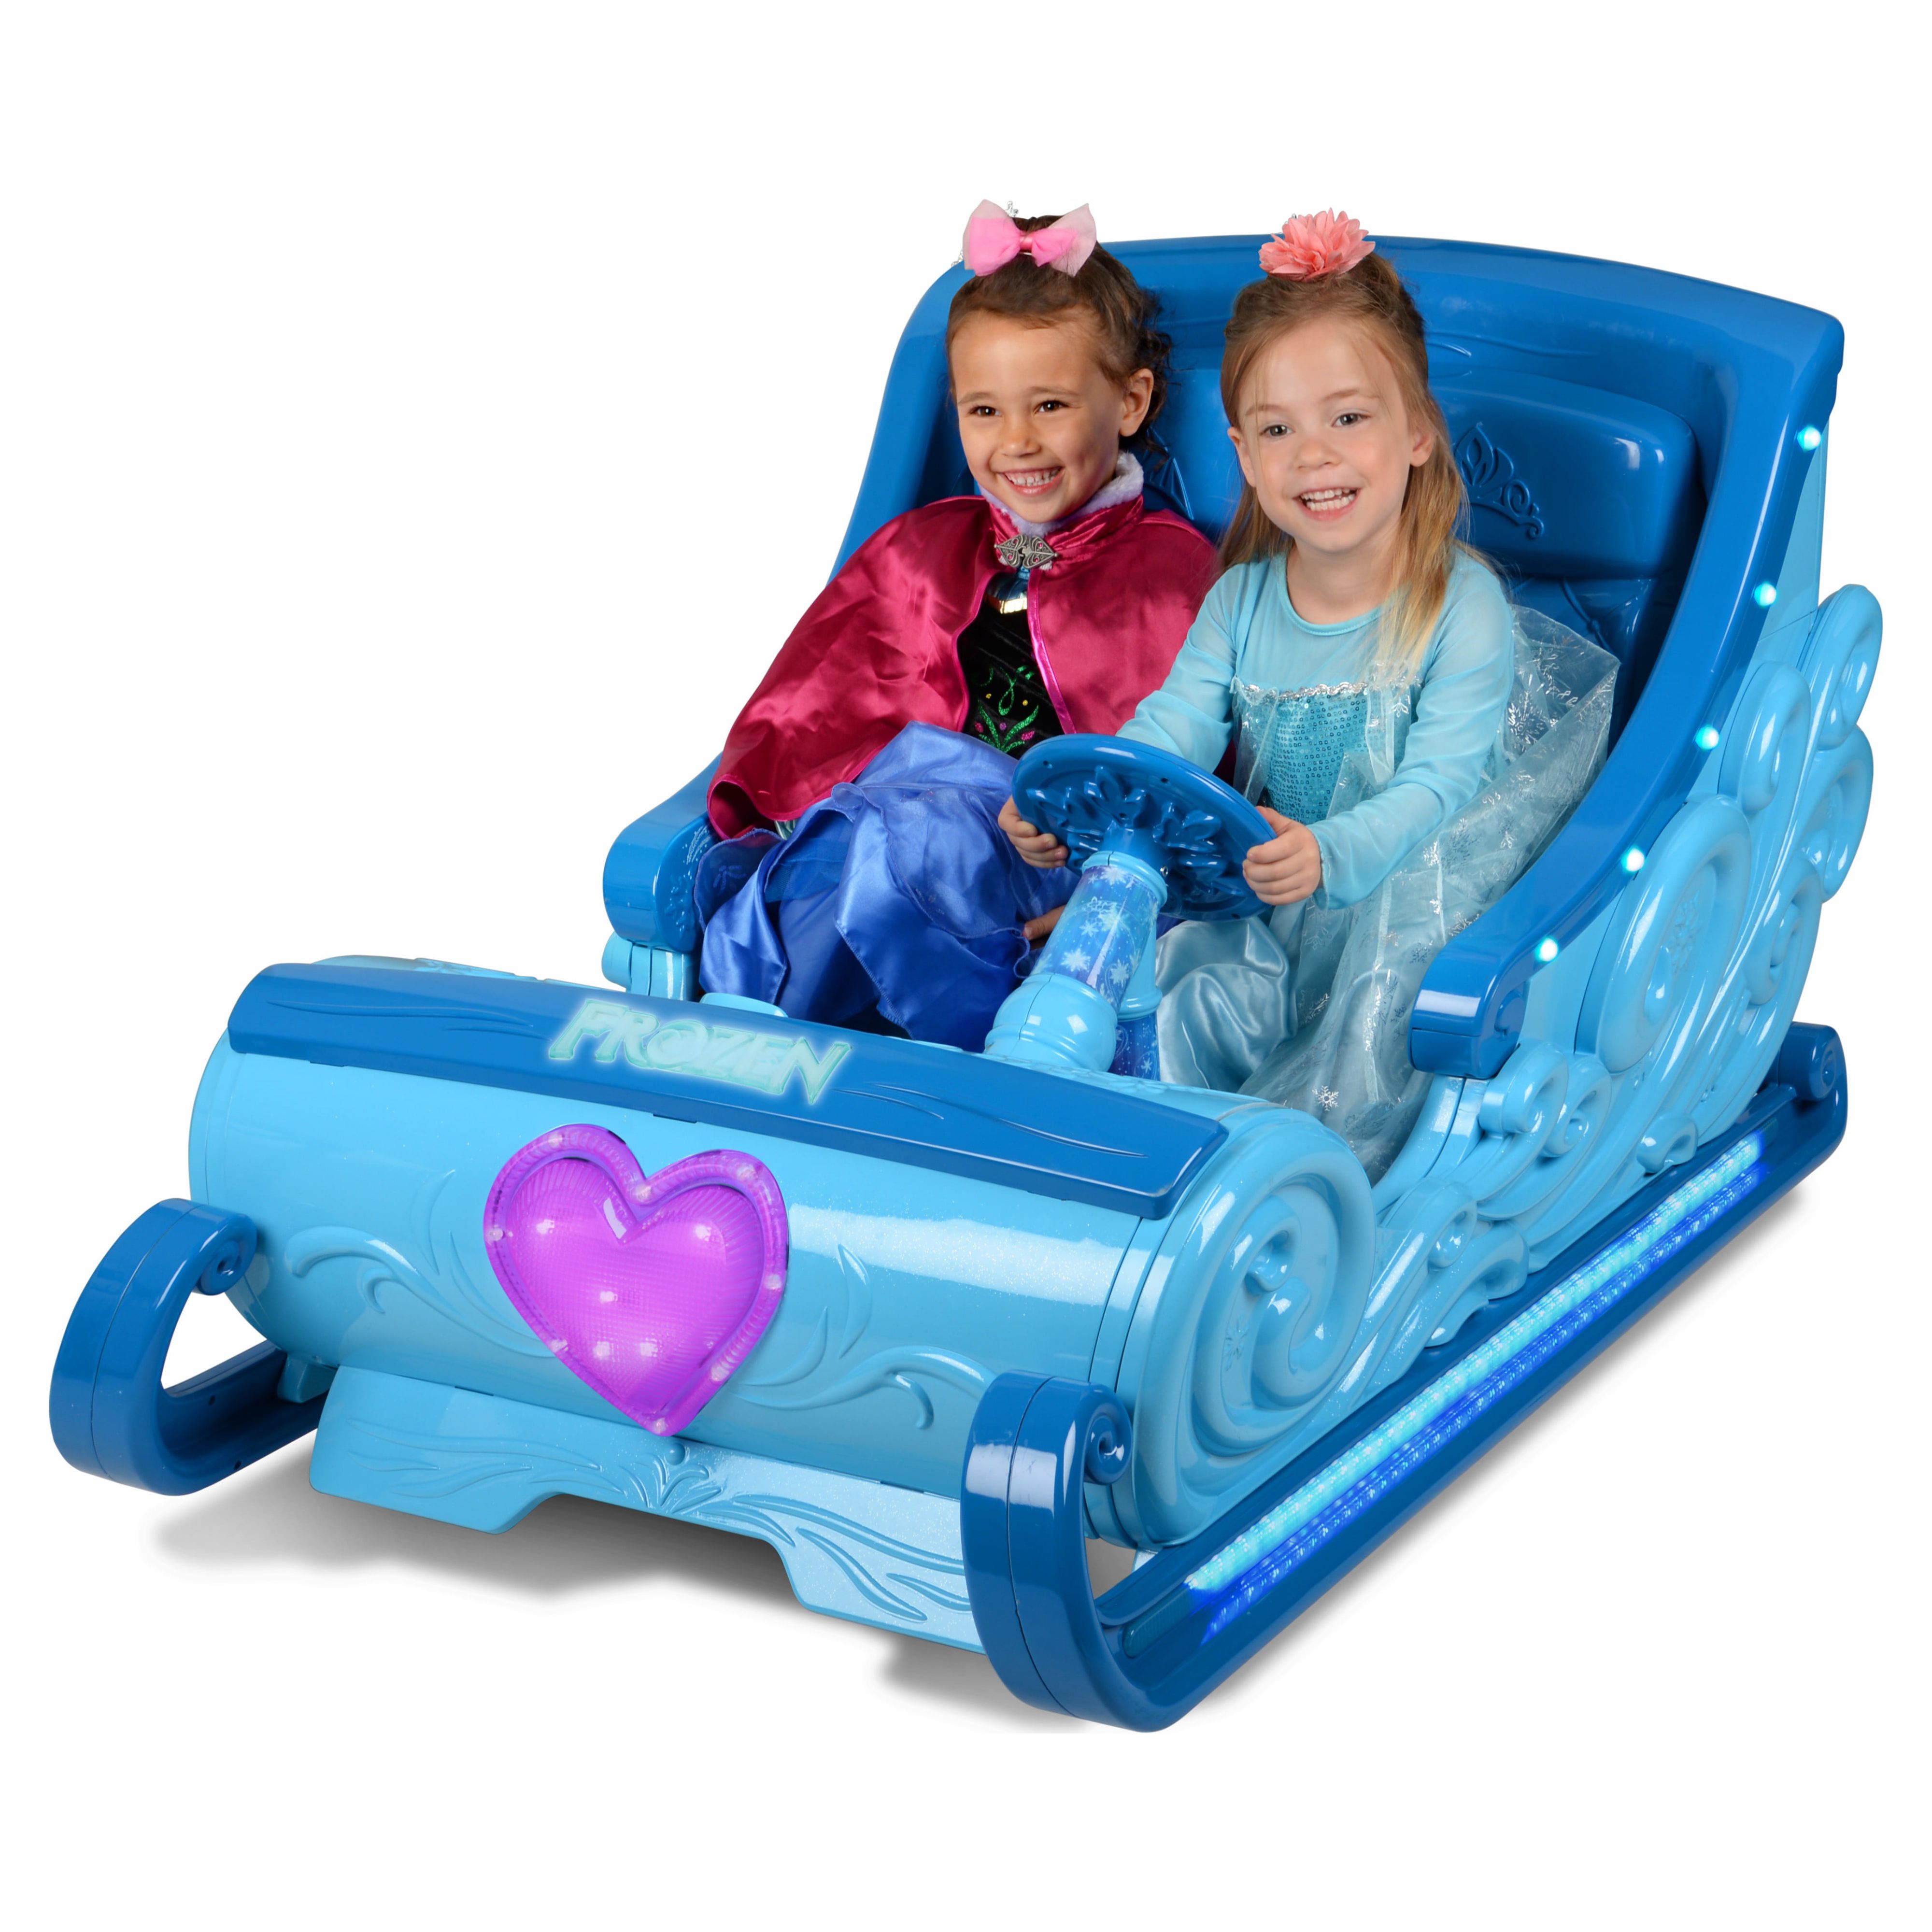 Disney Frozen Sleigh 12-Volt Battery Powered Ride-On for your little Elsa and Anna - Hours of Fun! - image 1 of 6